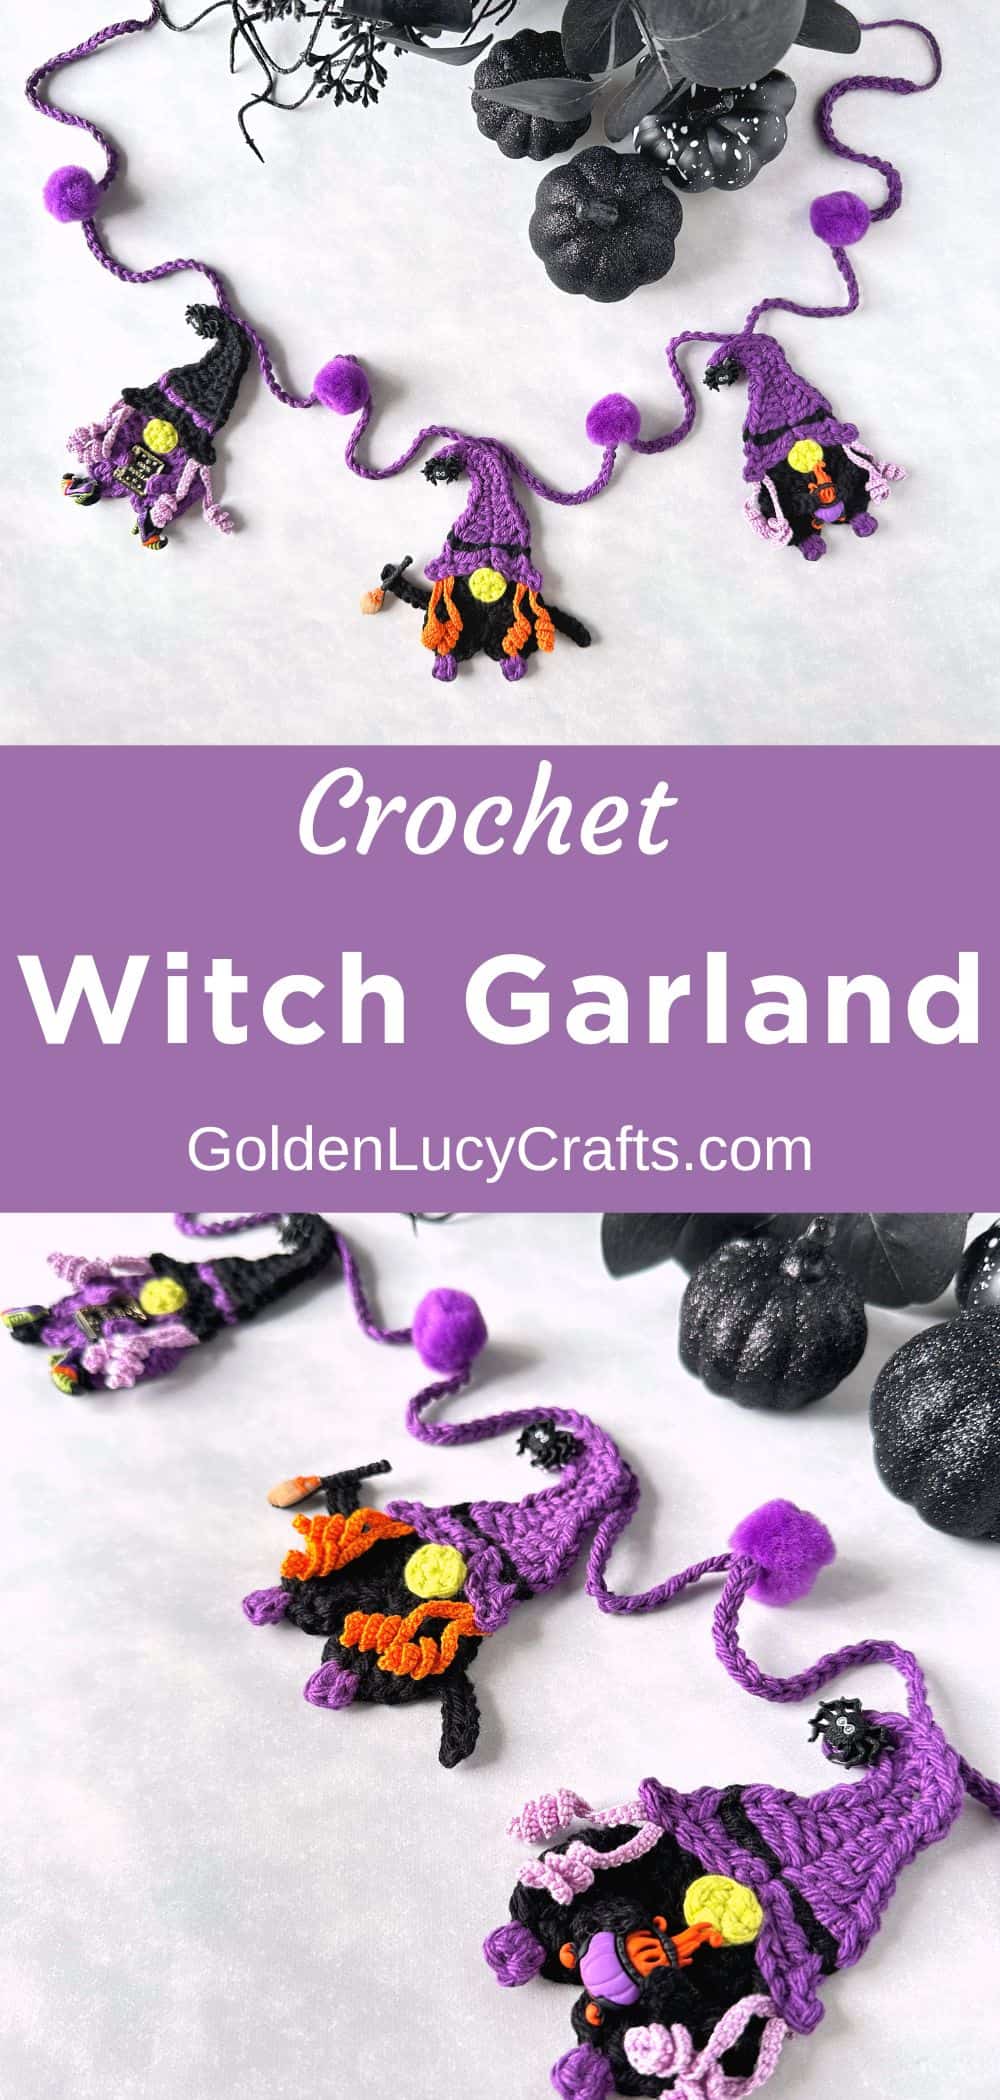 Crochet witch garland for Halloween decoration.